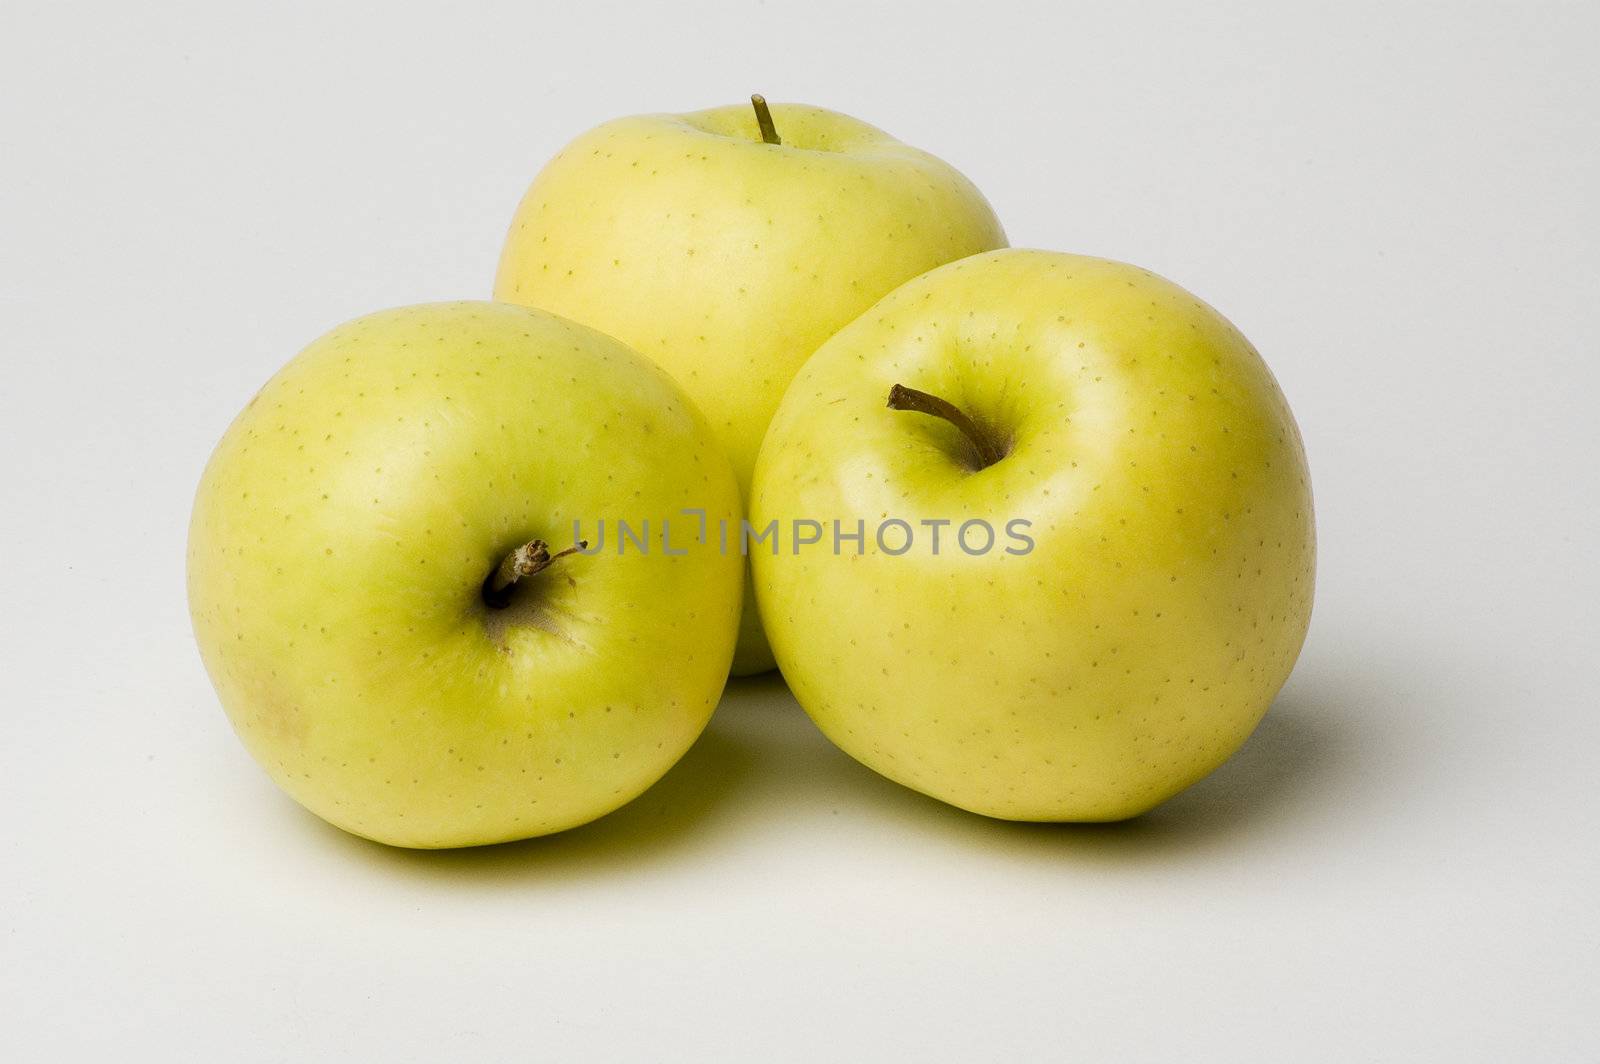 three yellow apples on a white background